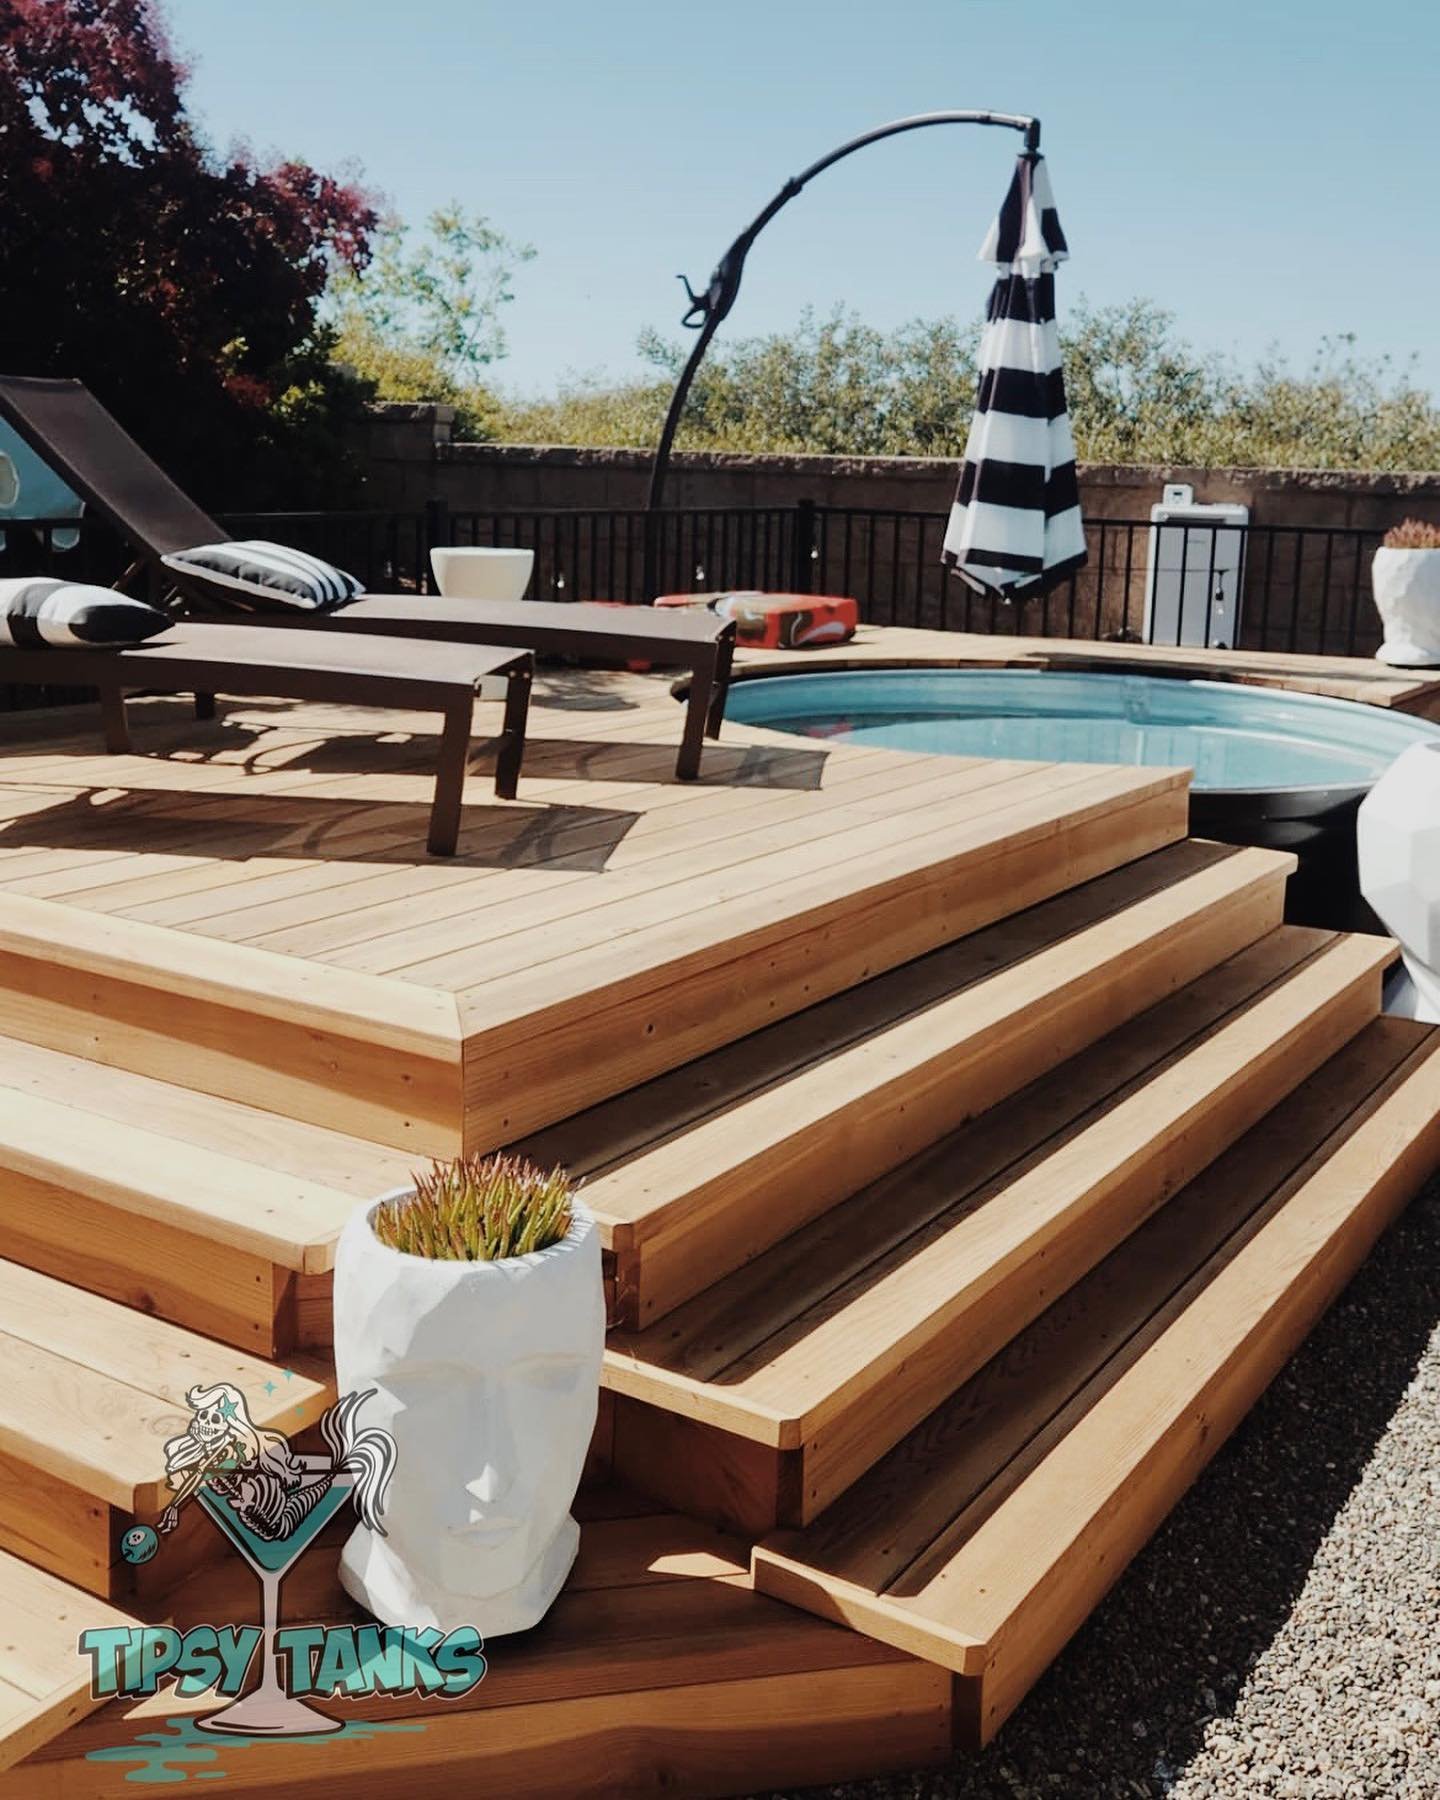 This heated 8ft stock tank pool in Paso Robles just got a makeover with this epic deck build-out!  The cool thing about our pools, they can be dressed up with wood decking for the ultimate hangout spot. 

DECK TIP 👉 before you start a deck, your tan